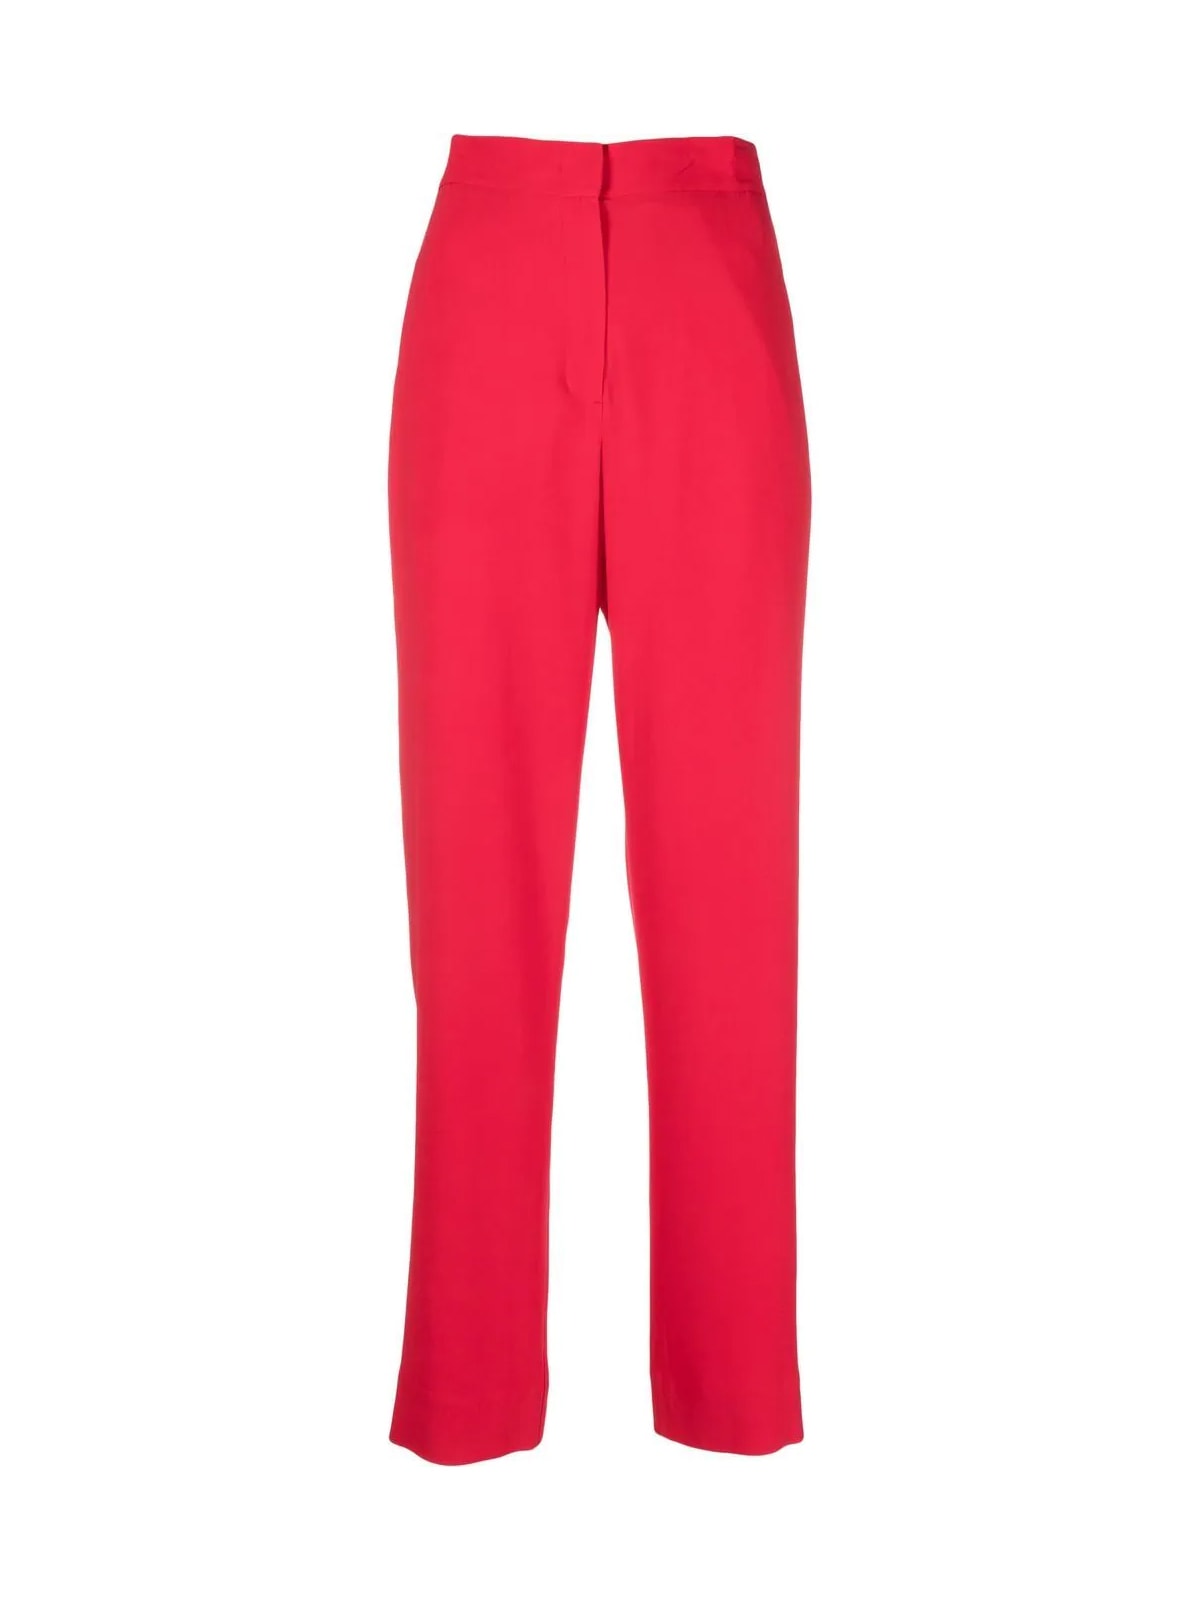 Straight-leg pants in a stretch couture cotton blend